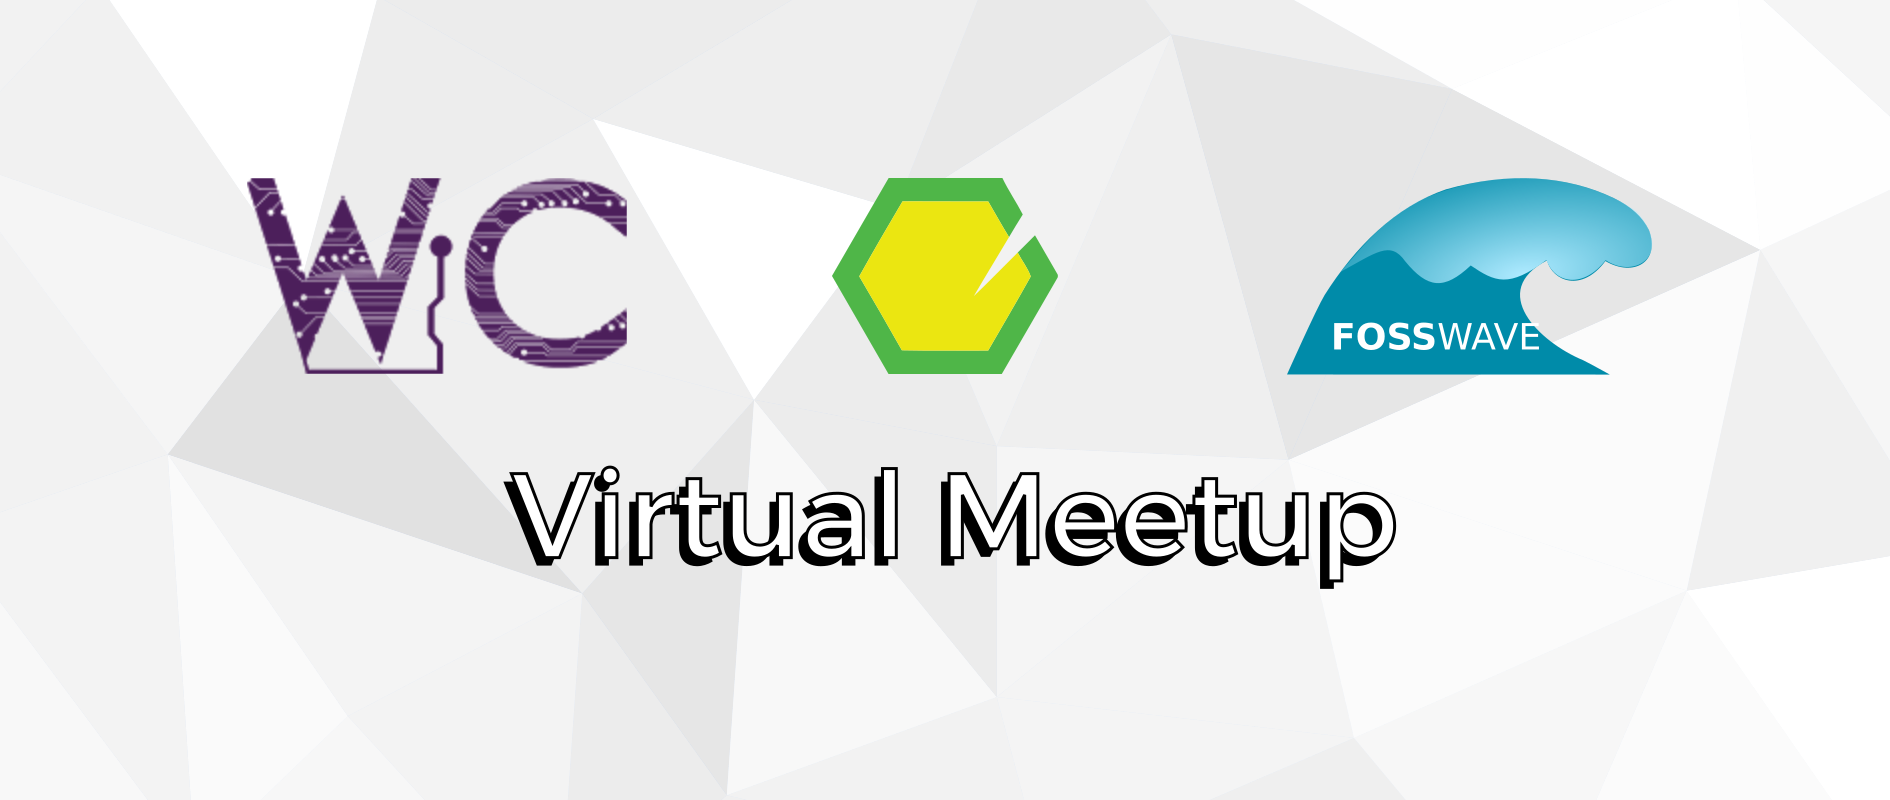 Virtual meetup with WiC, Open Labs, FOSS Wave